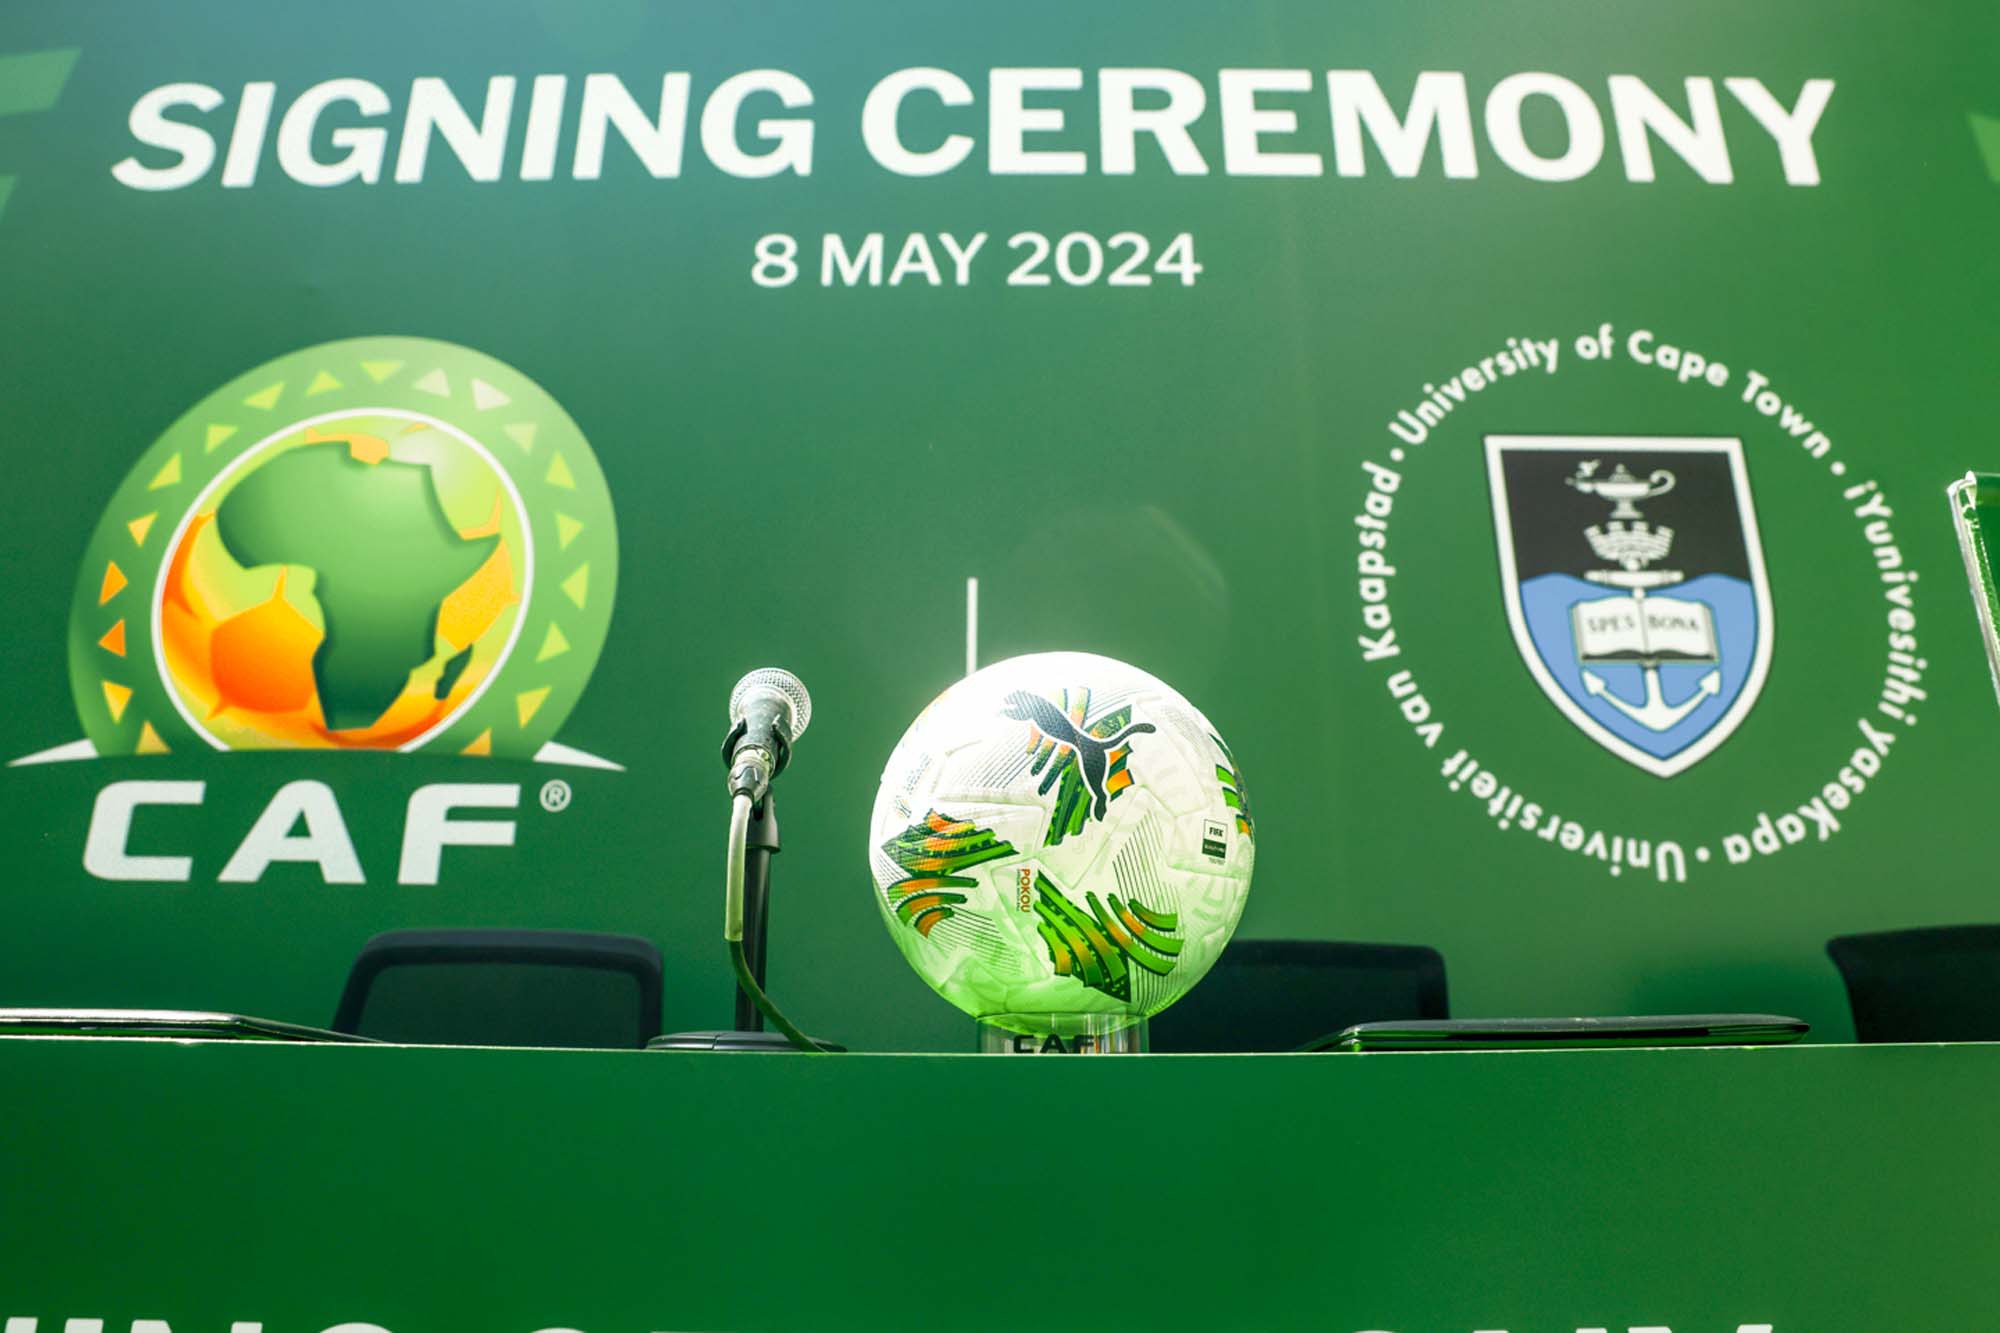 CAF and UCT branding.